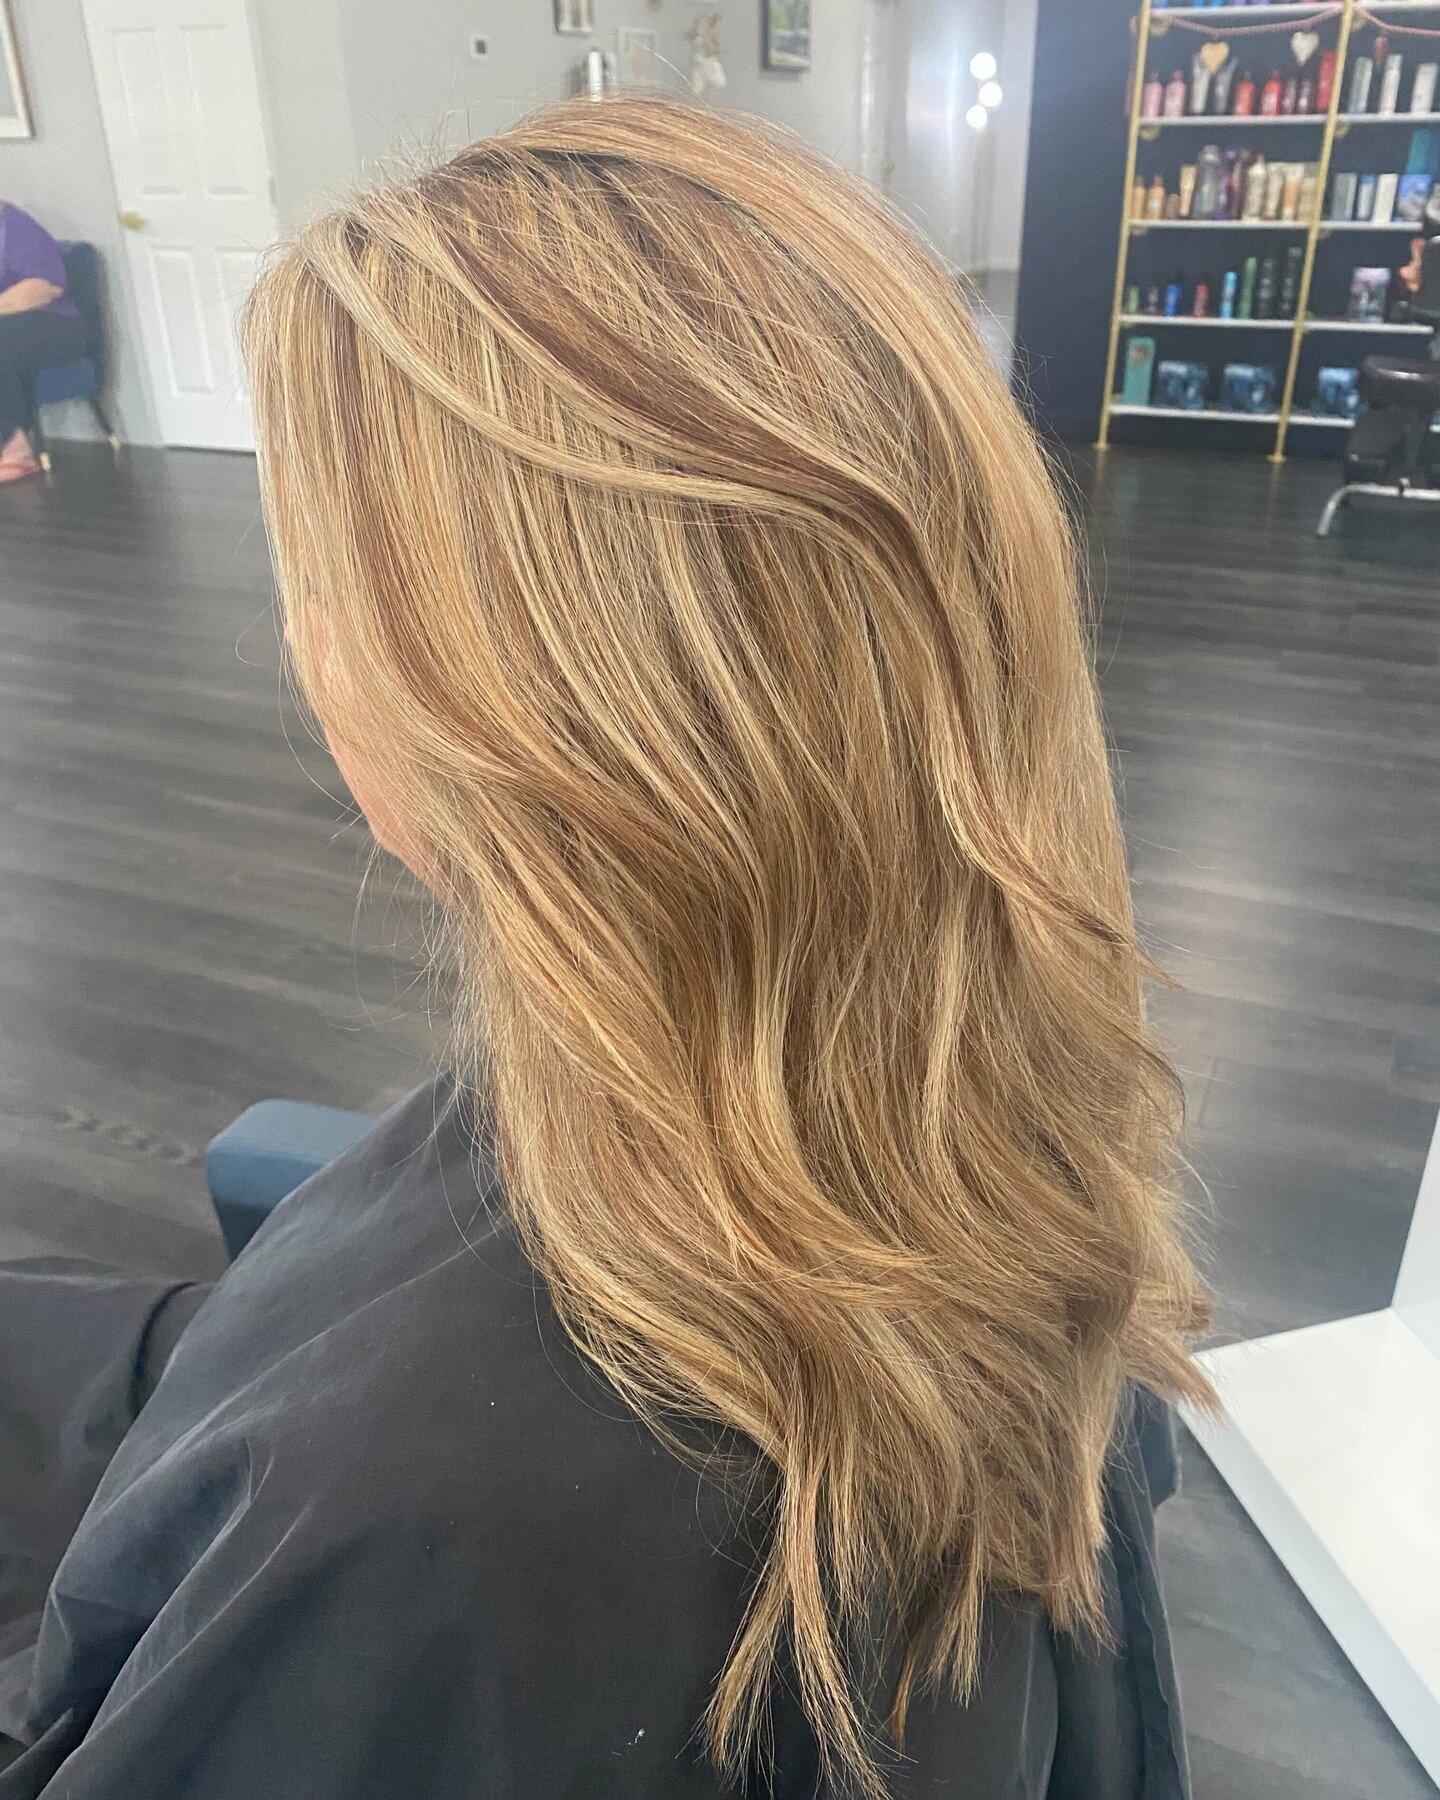 🌟 Honey Blonde and Lowlight Browns 🌟⠀
⠀
Achieving this dreamy hair hue isn't just about the look, it's about maintaining the health and vitality of your locks too! ⠀
⠀
Our top priority is keeping your hair strong and beautiful, even while experimen